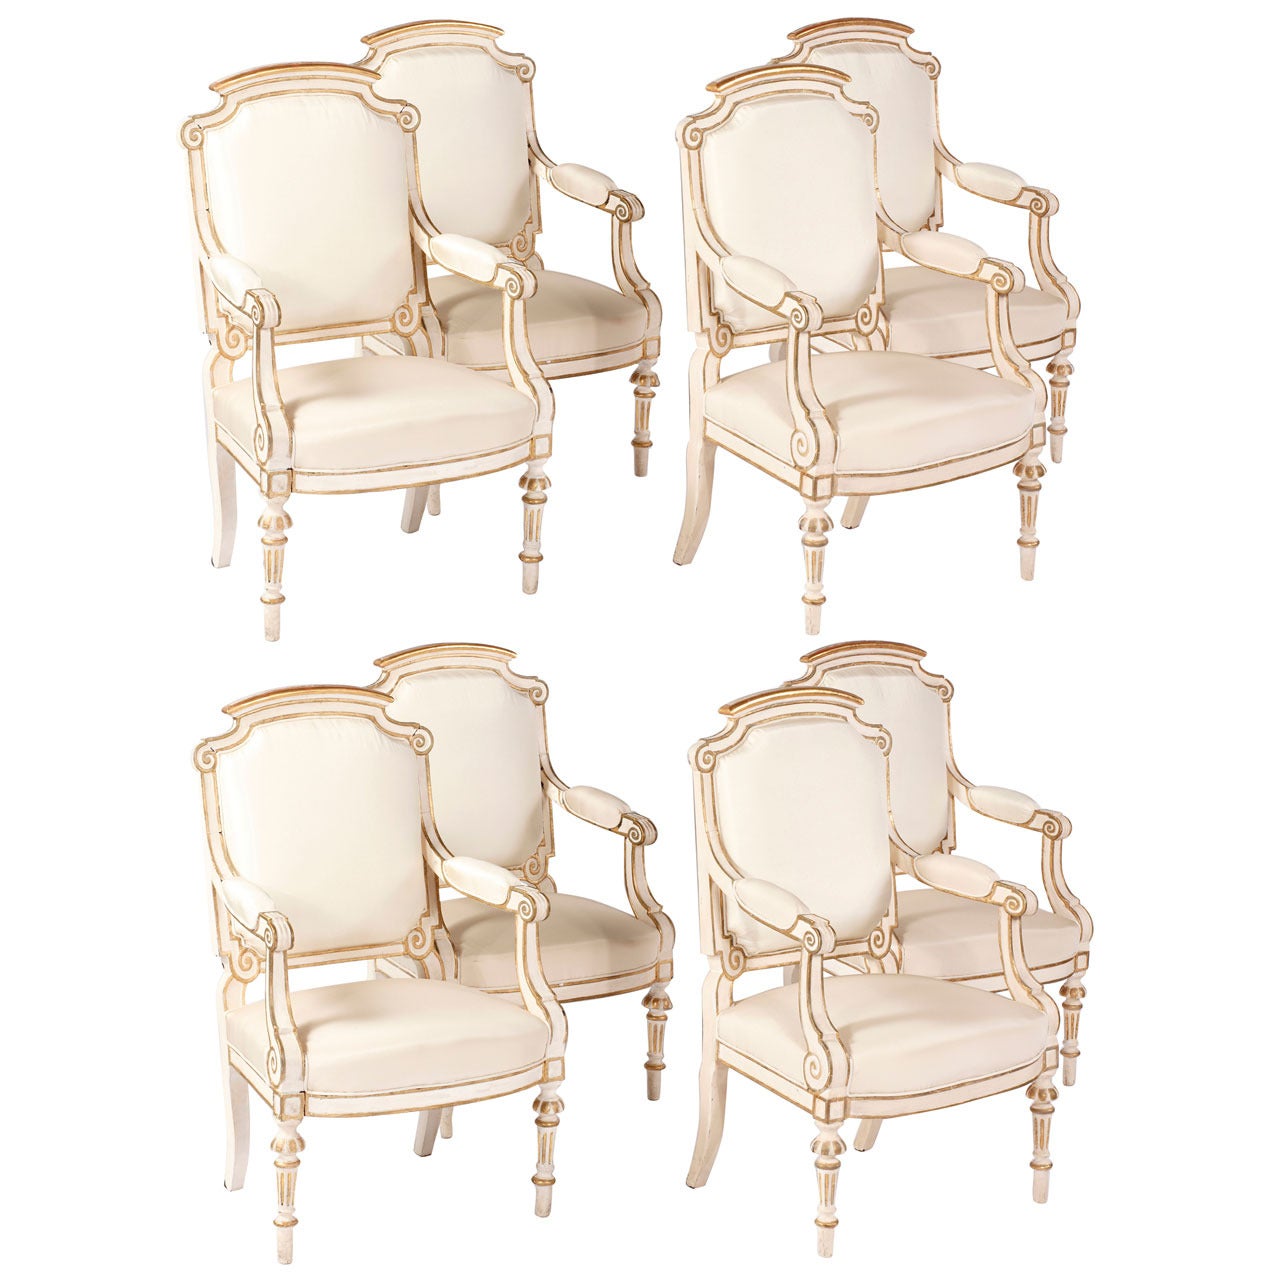 A Set of Eight Italian  Painted & Parcel Gilt Fauteuils, Early 19th Century For Sale